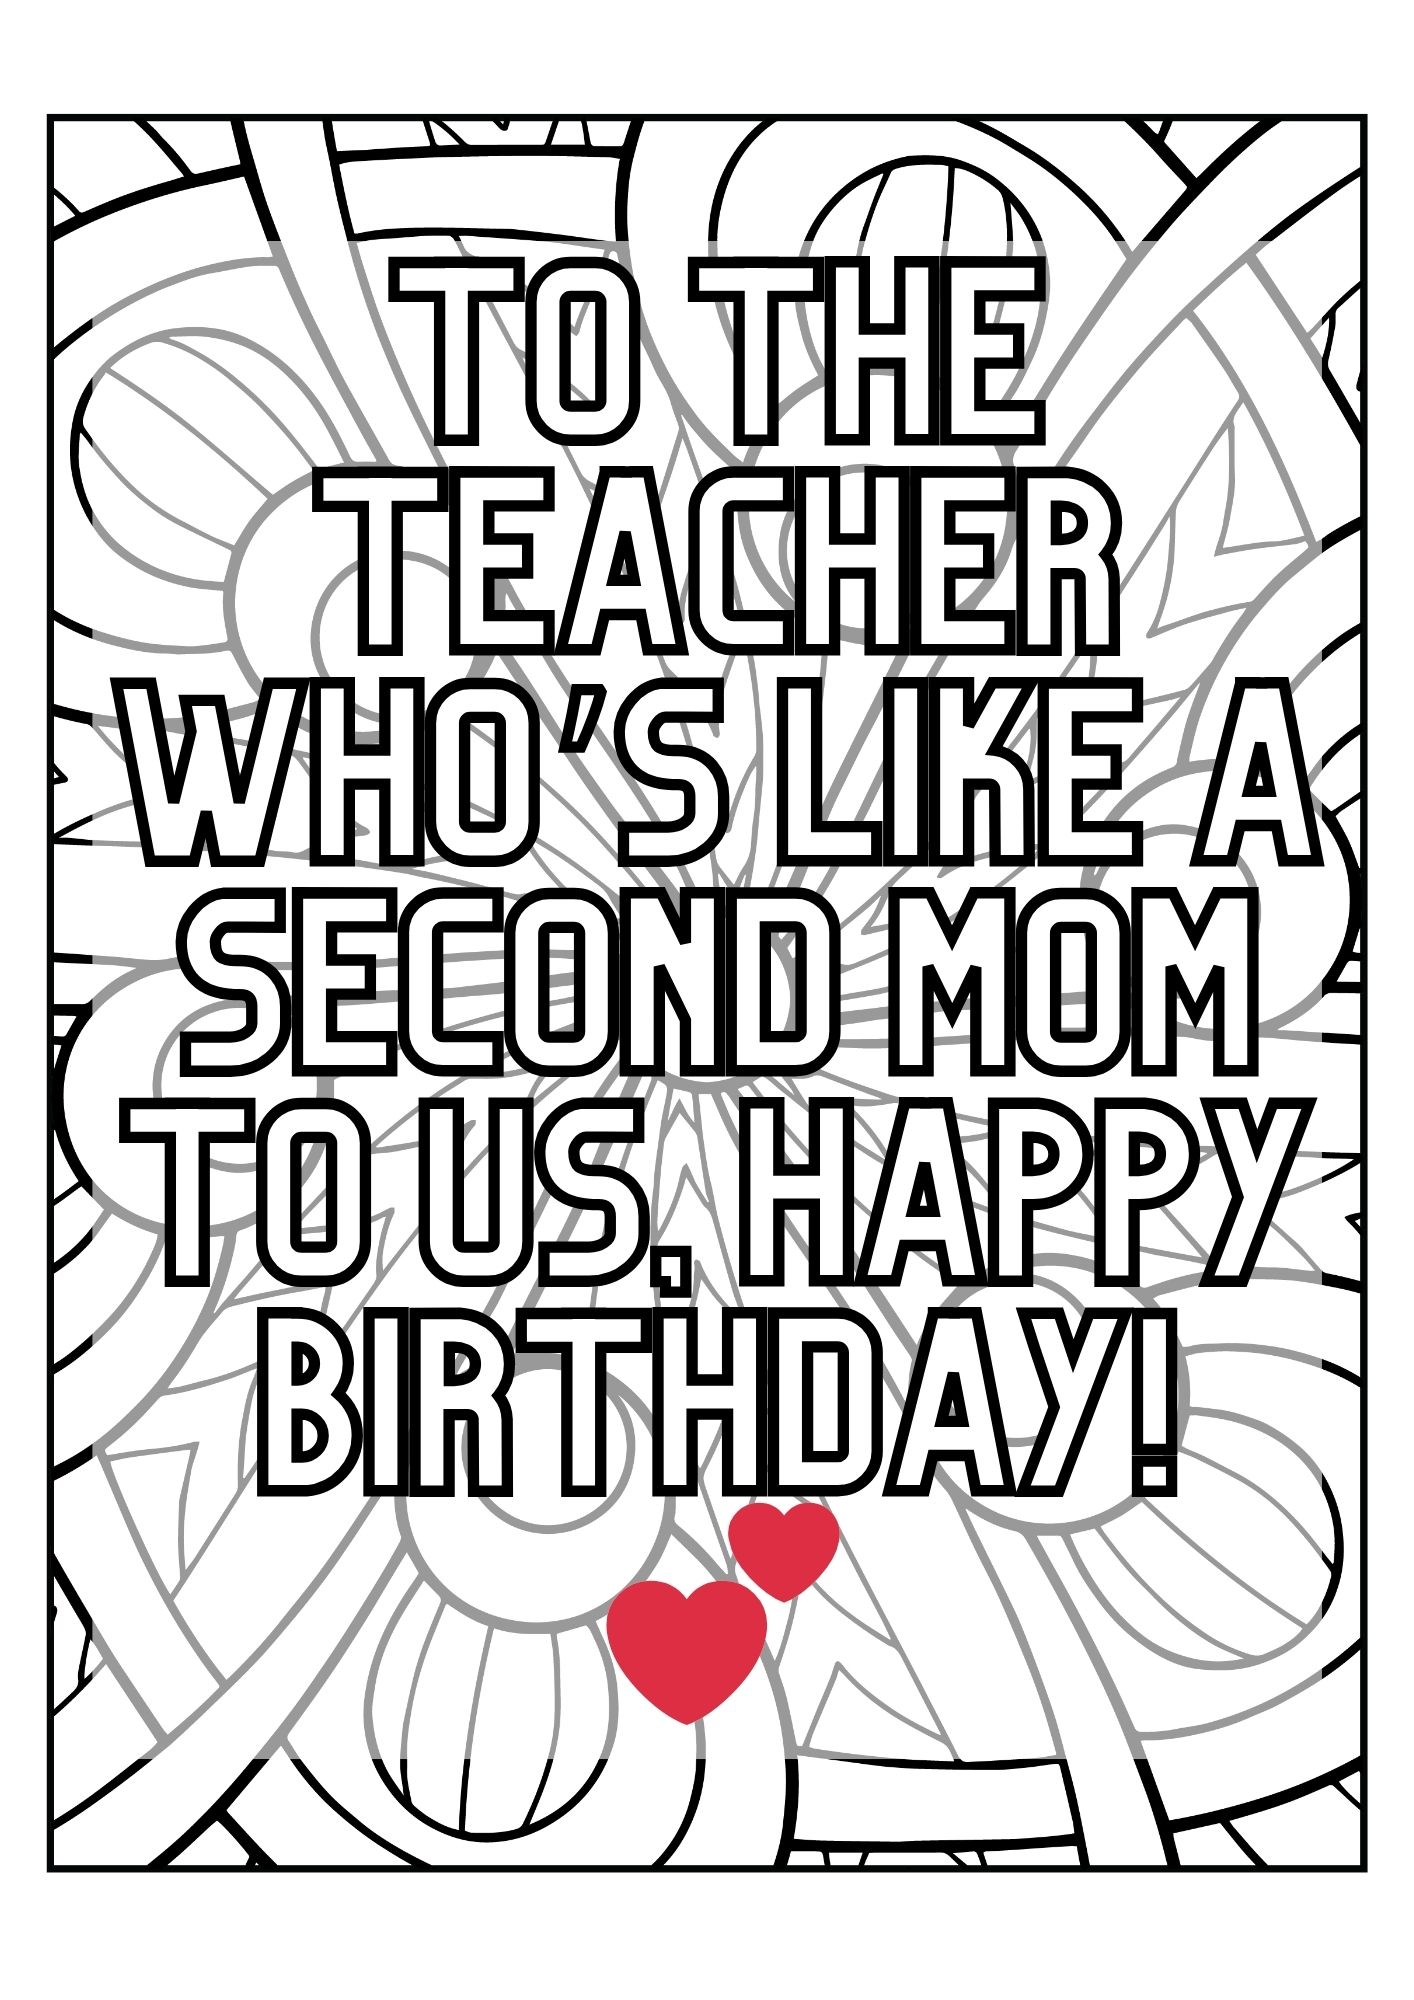 50 of the Best Birthday Quotes for a Teacher